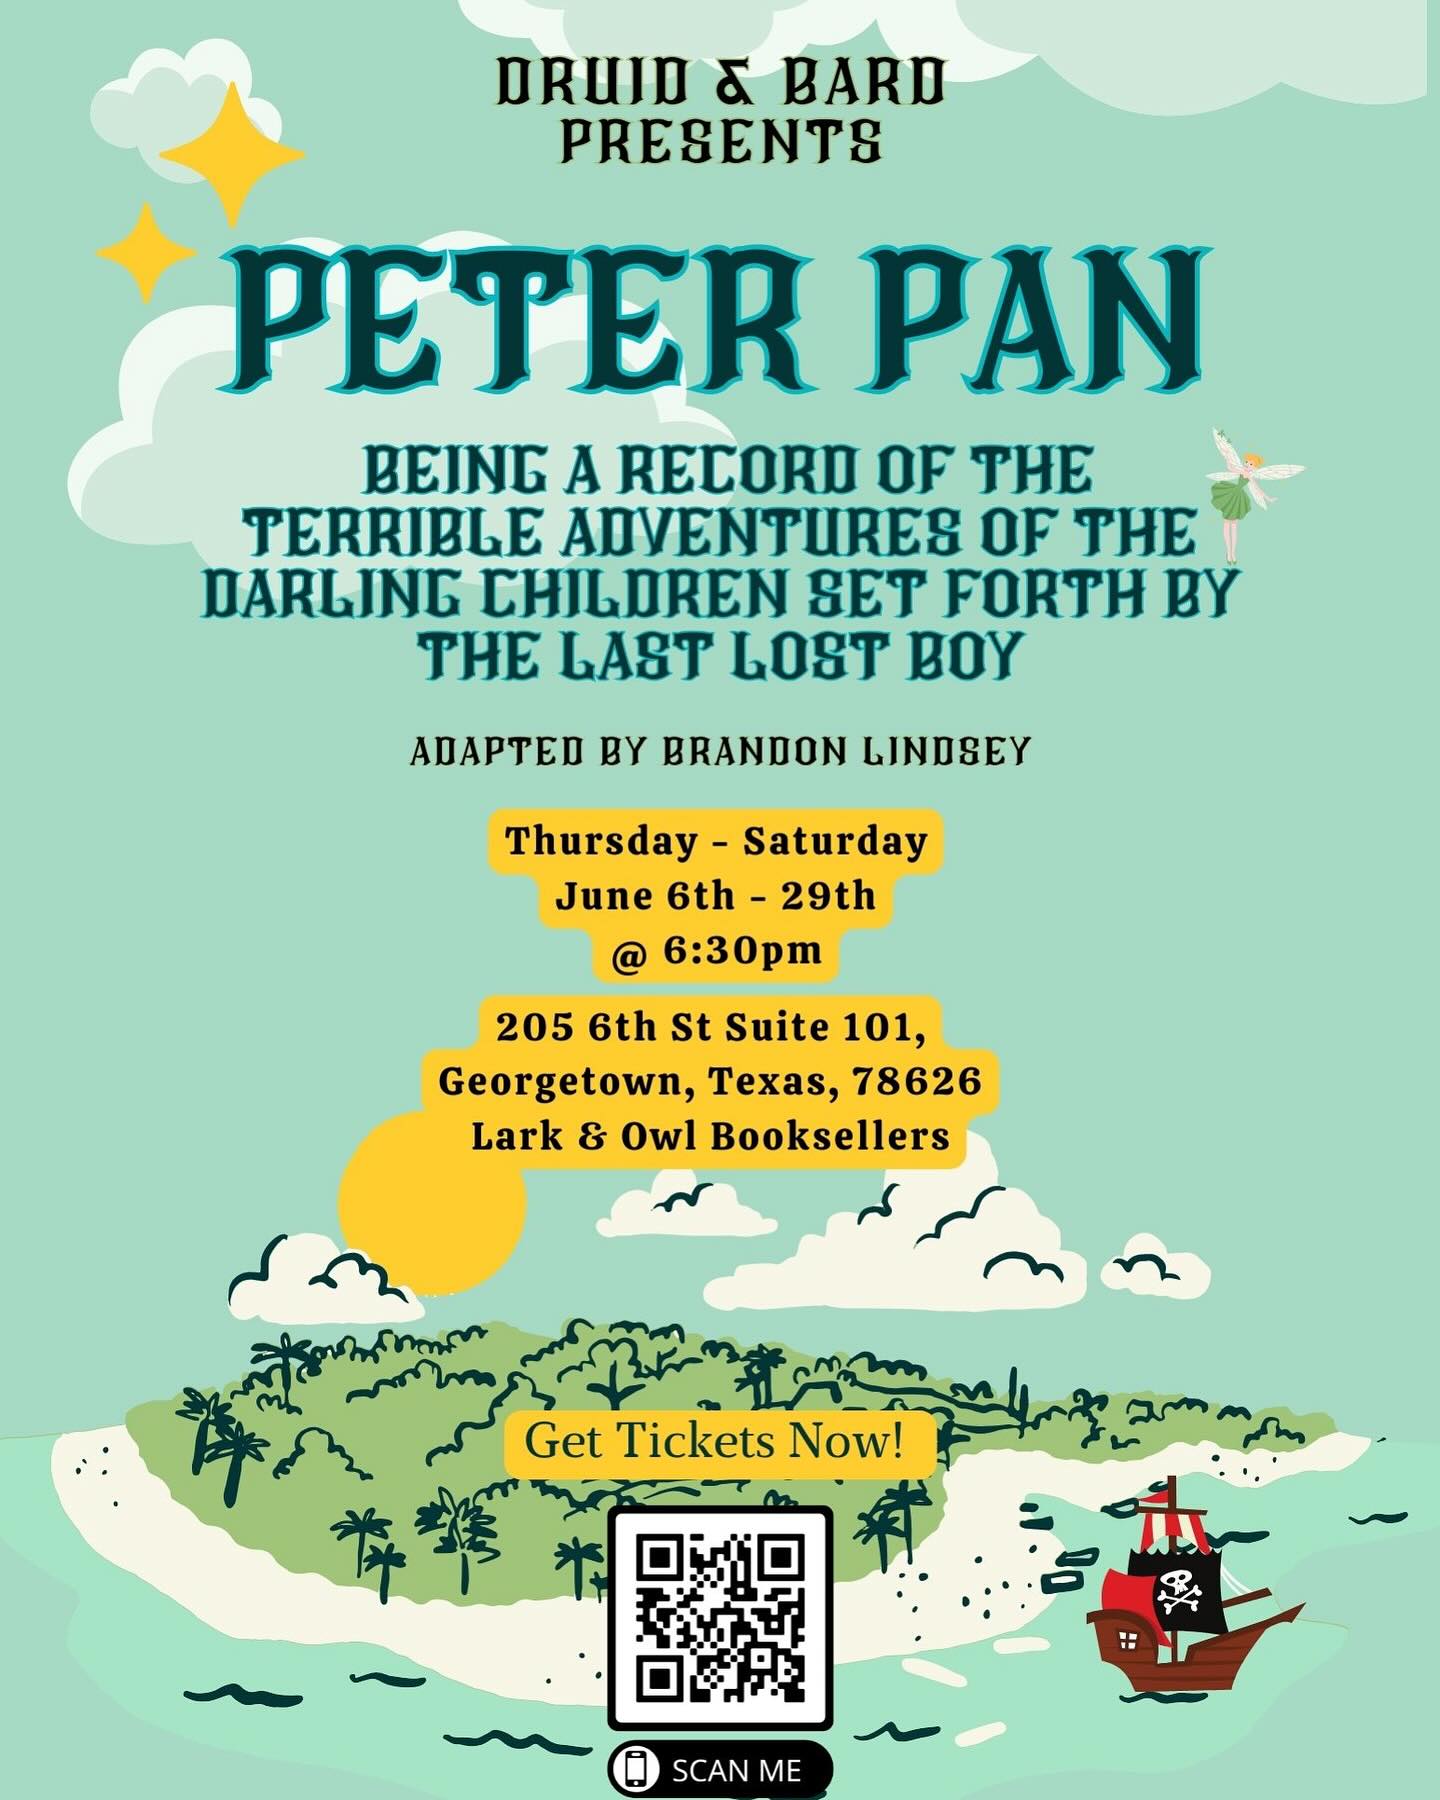 J.M. Barrie's Peter Pan, Being a Record of the Terrible Adventures of the Darling Children . . . . by Druid & Bard